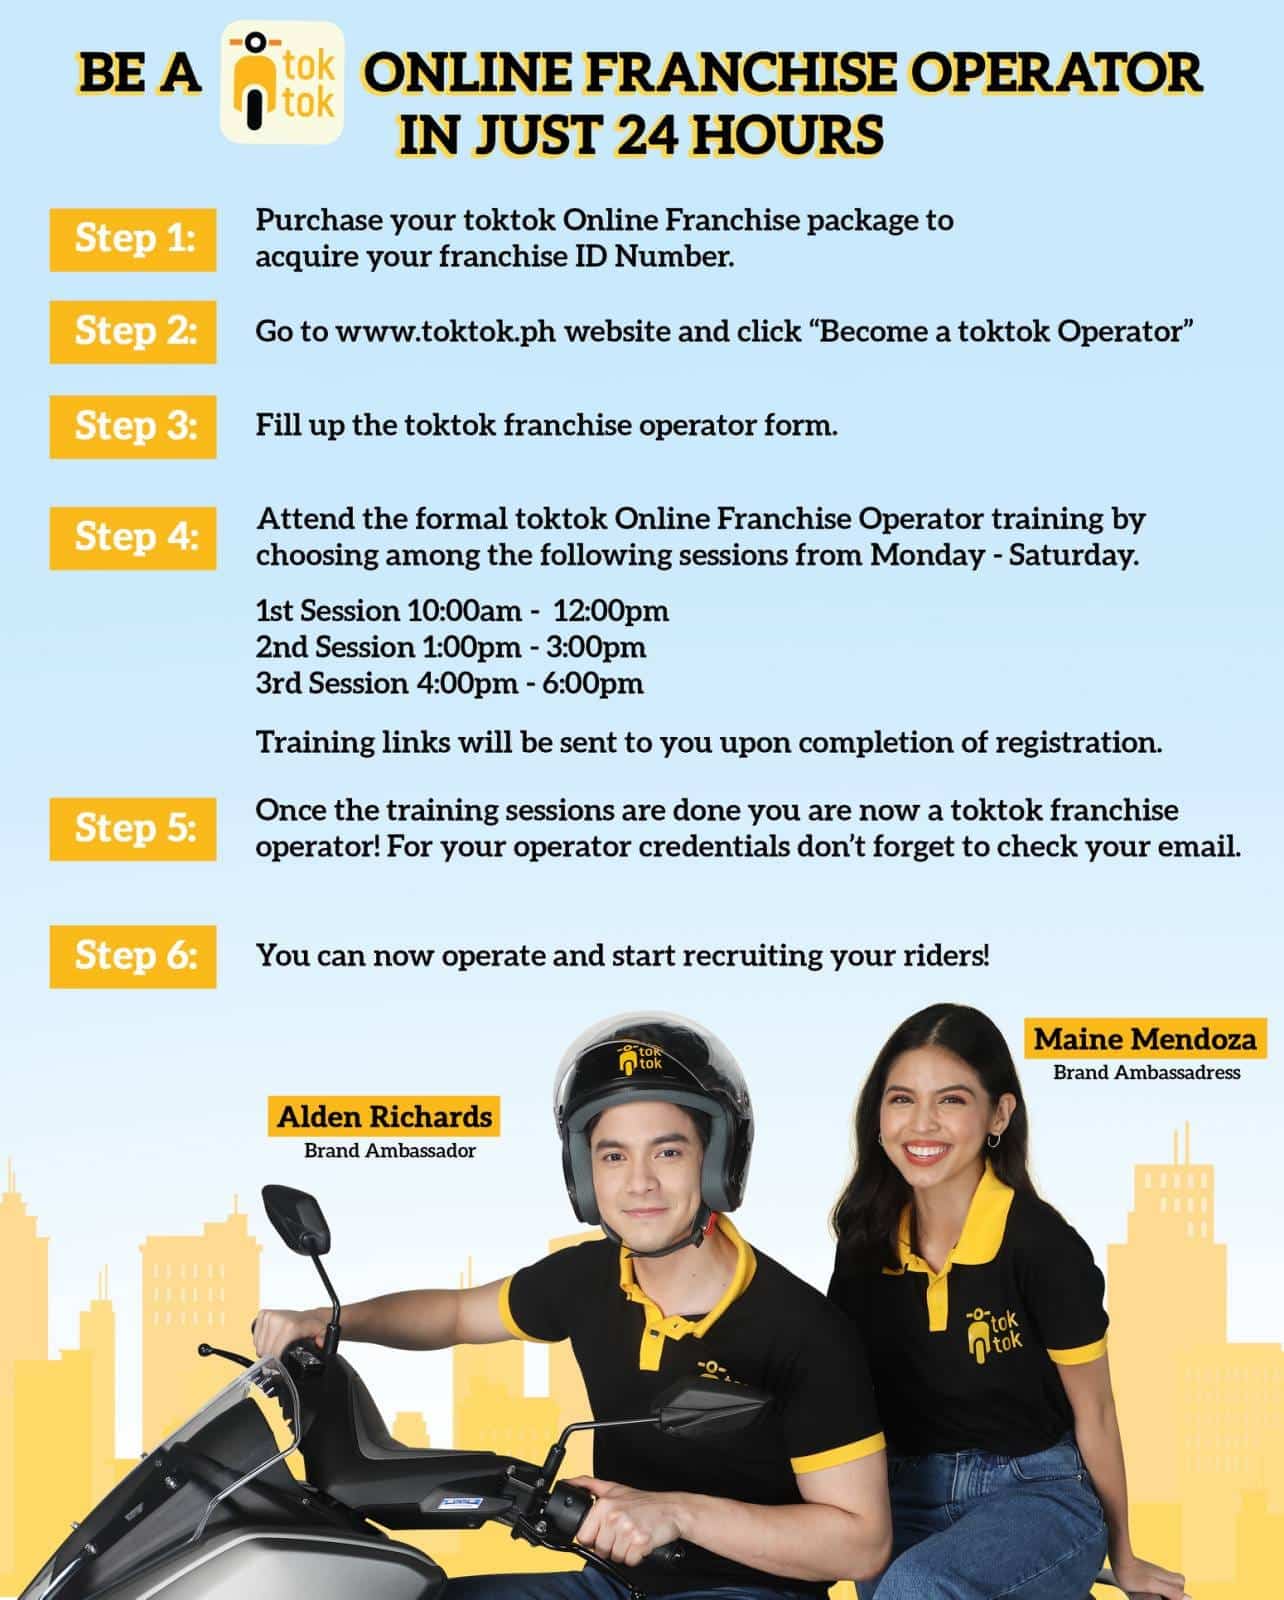 How to be a TokTok Online Franchise Operator